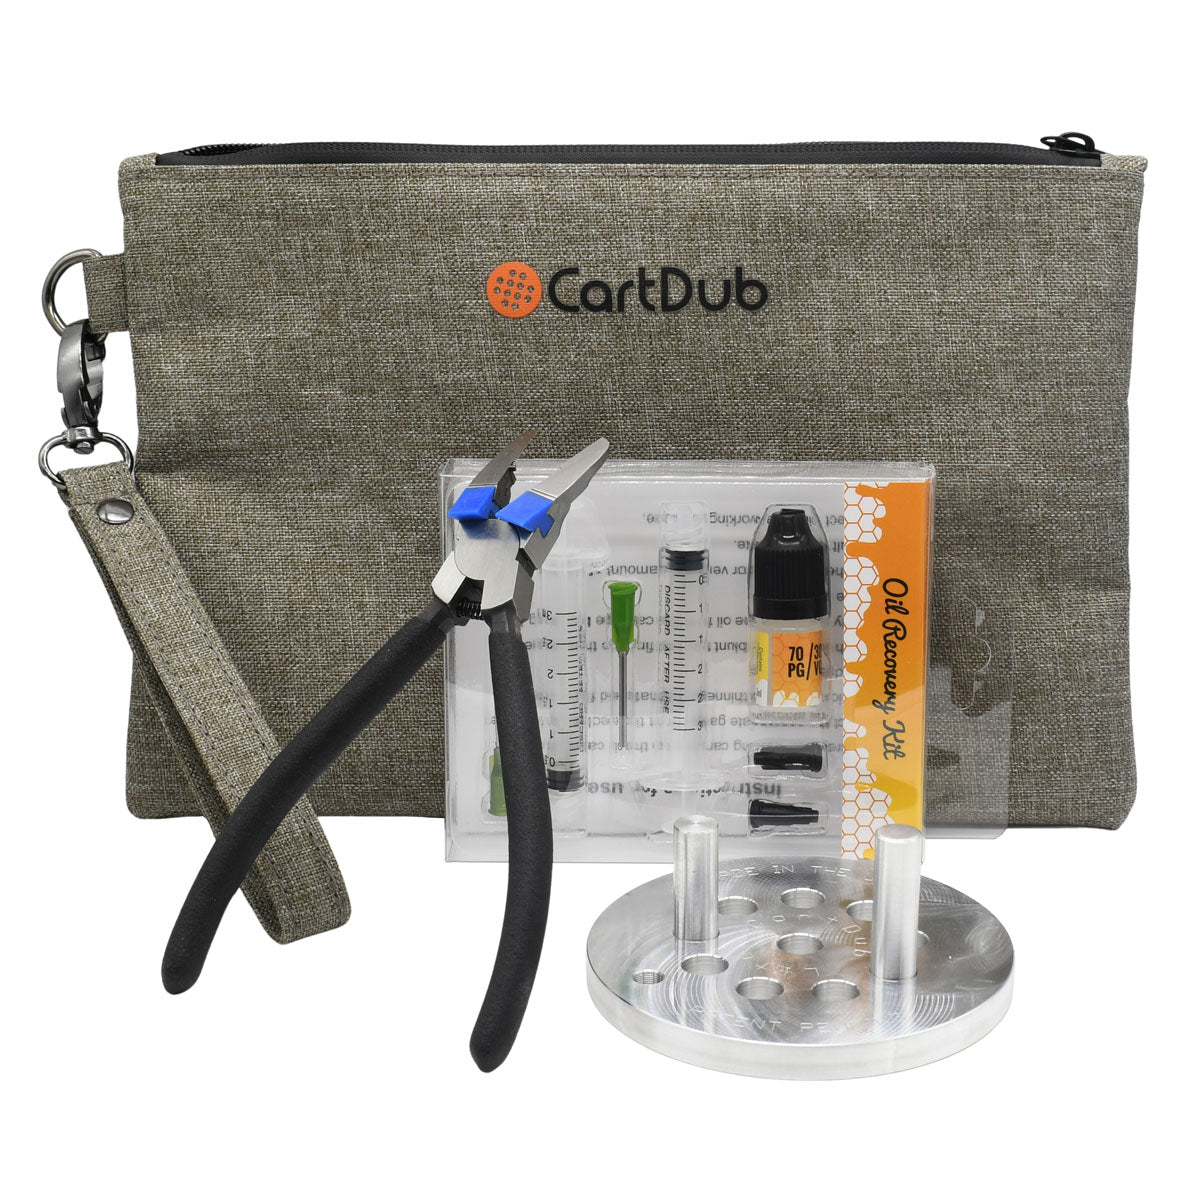 CartDub Kit to open and remove oil from carts